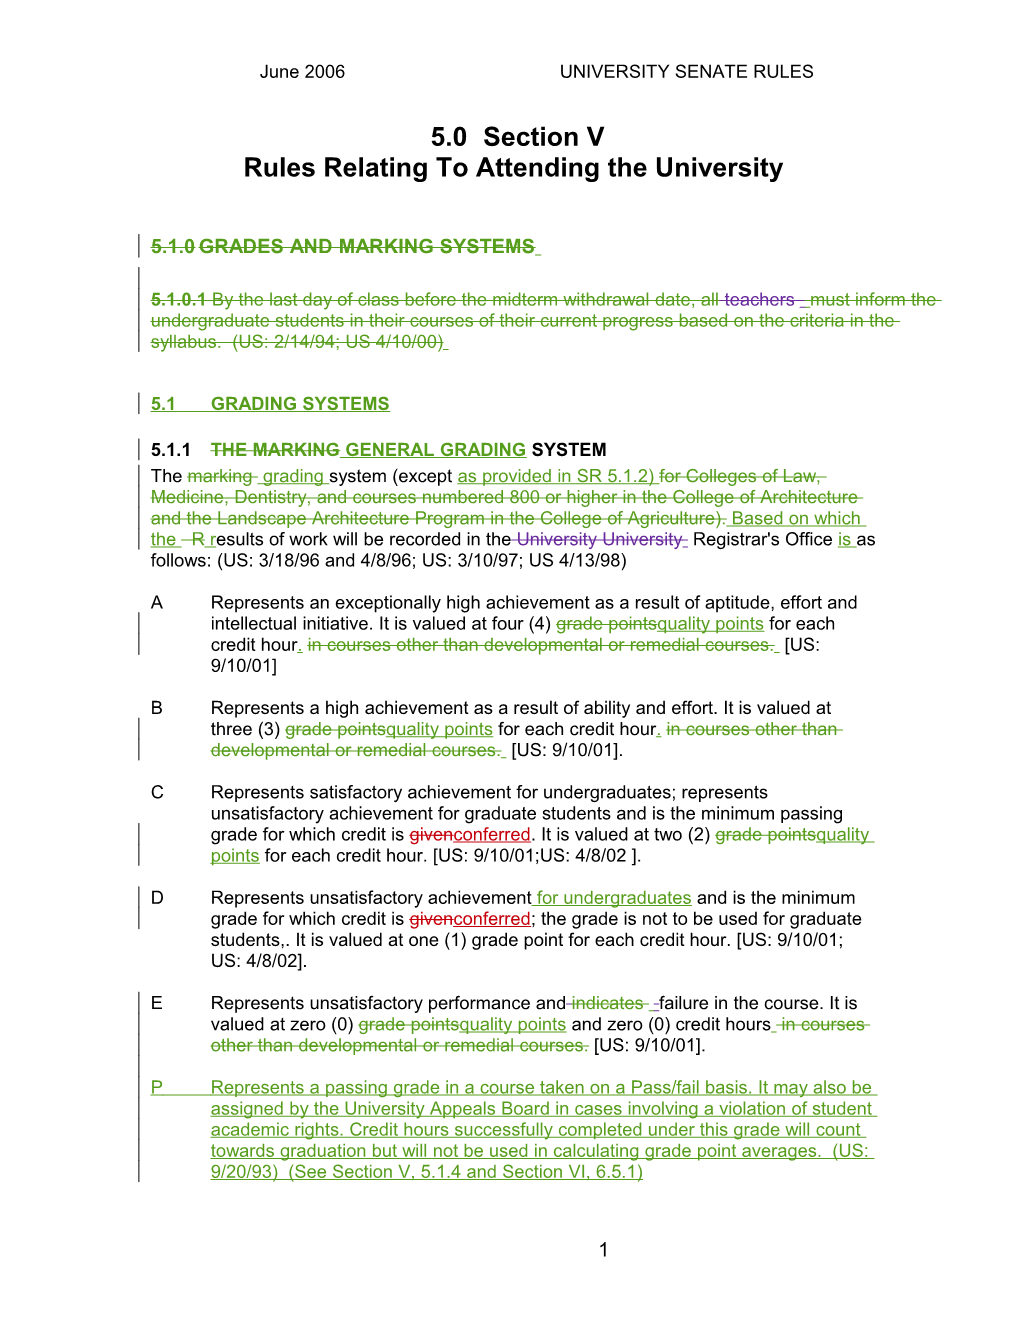 Rules Relating to Attending the University